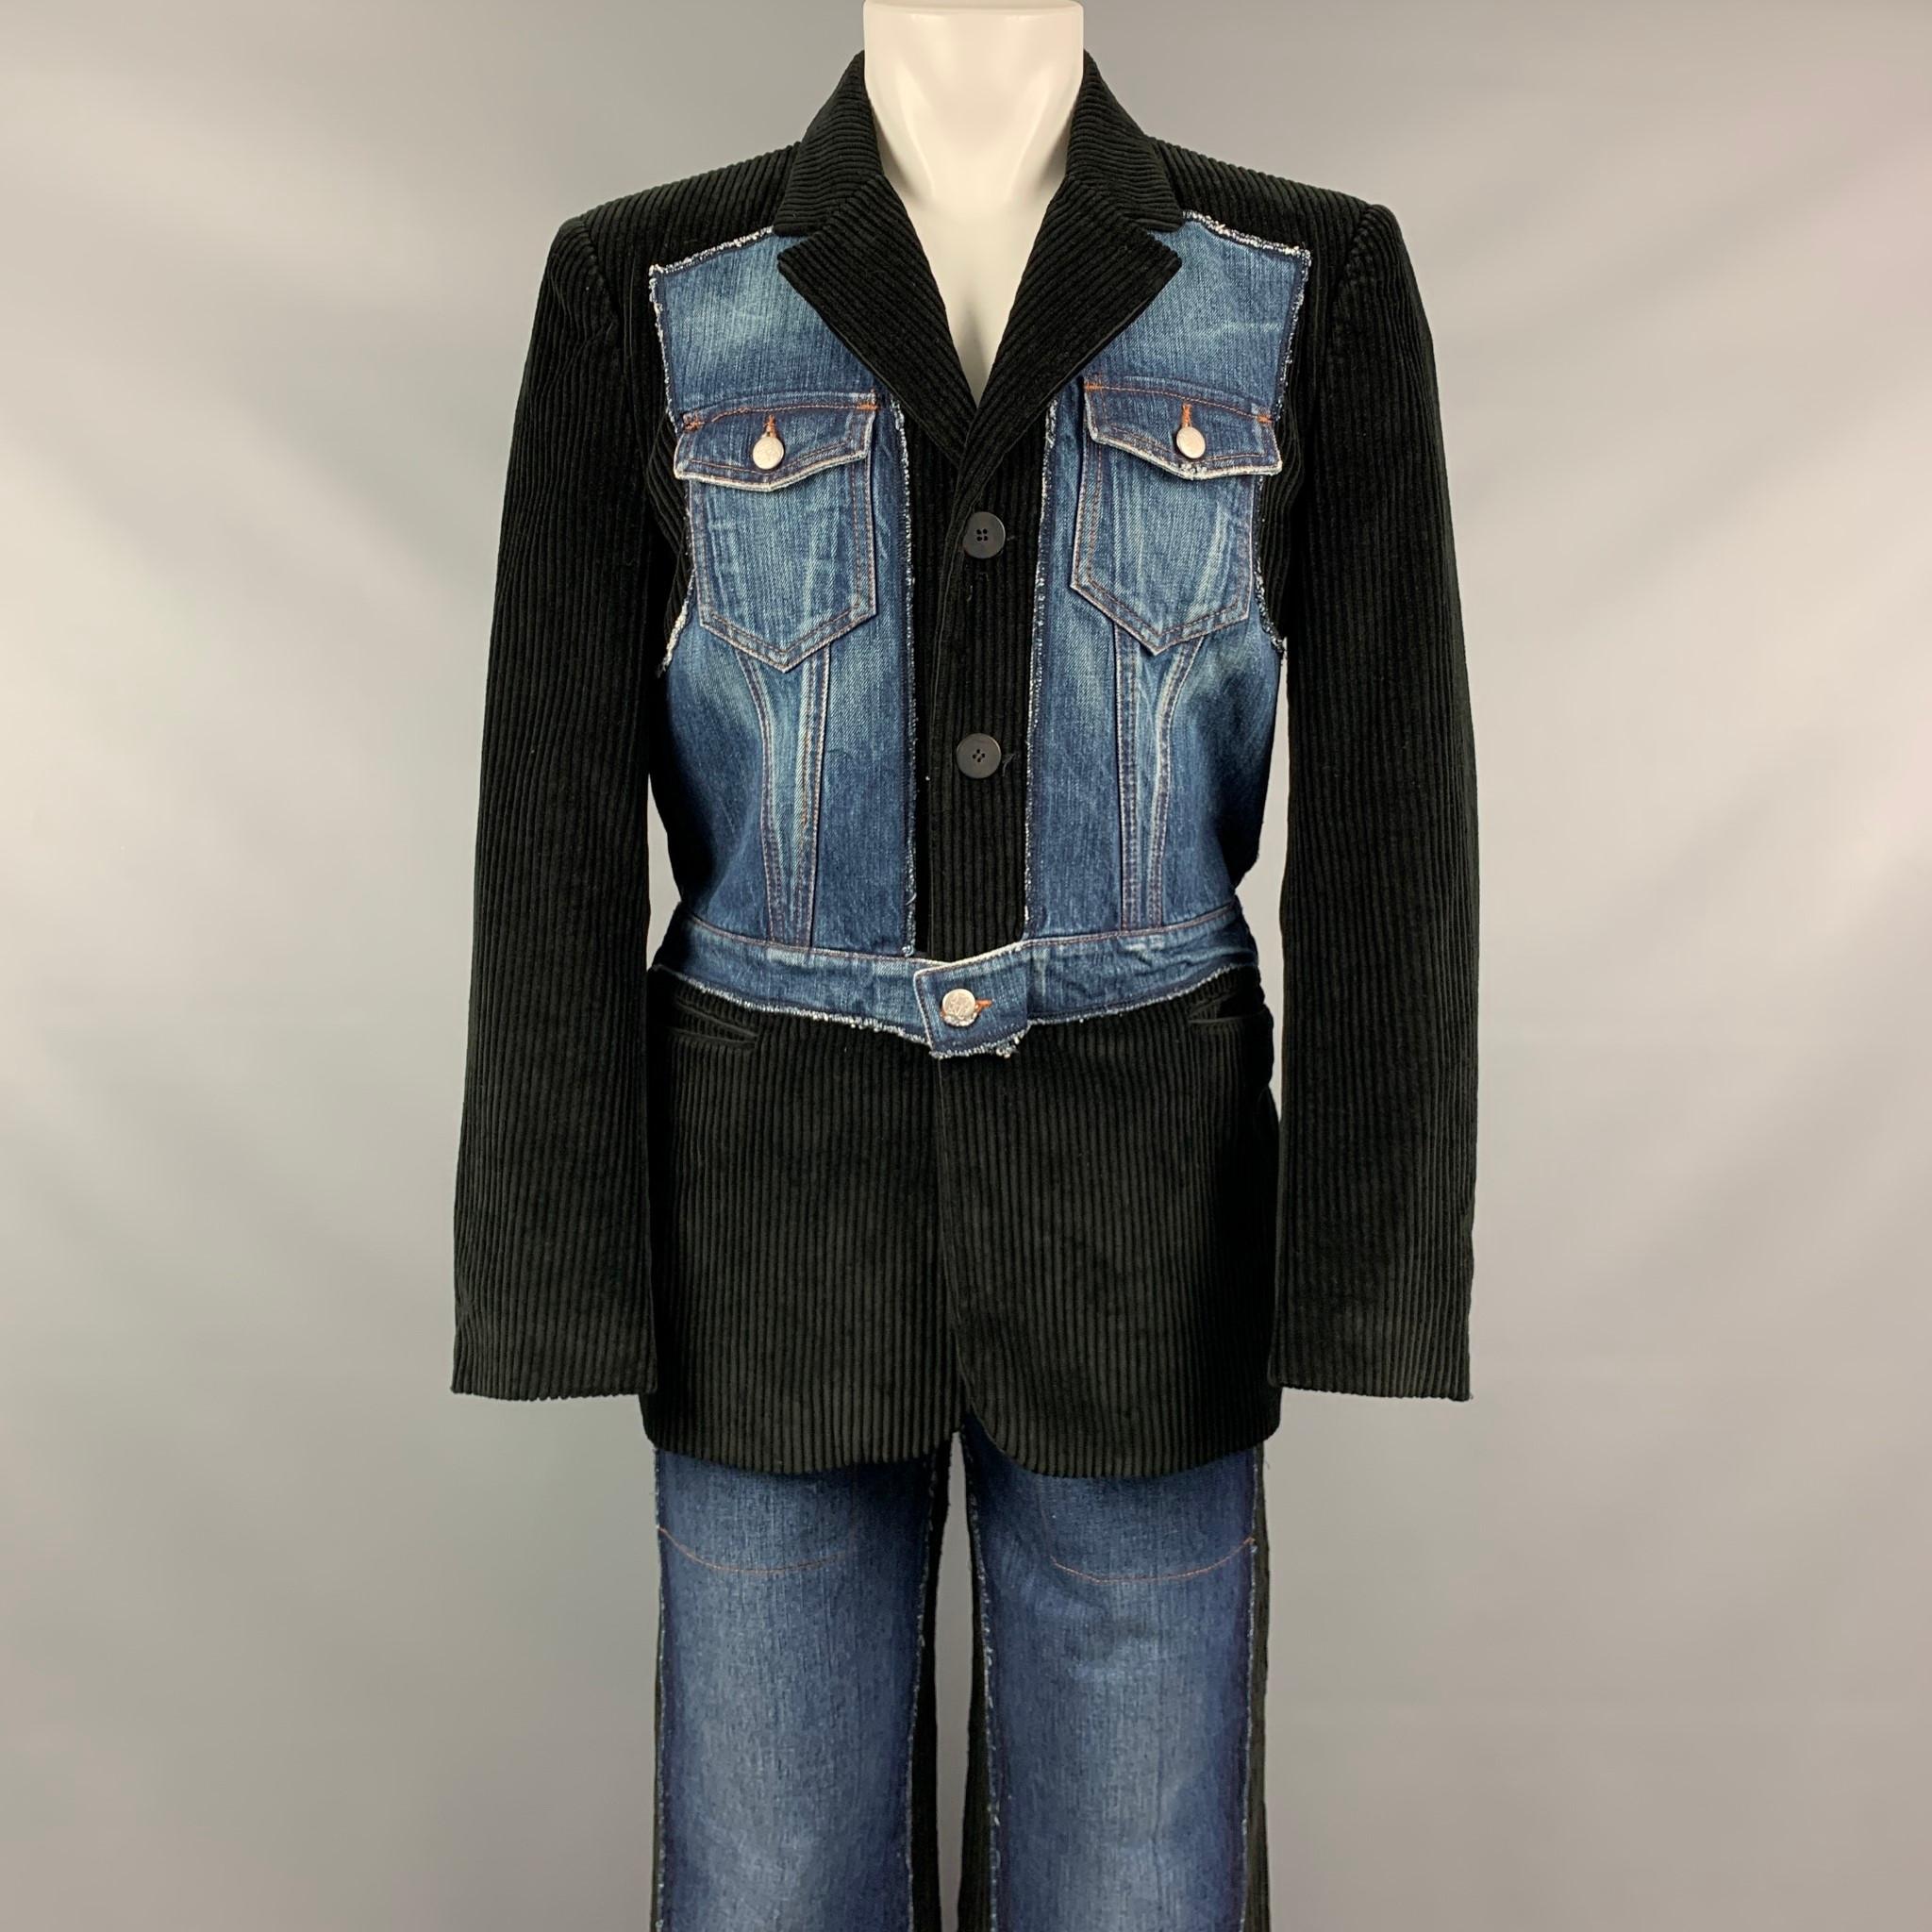 Vintage GAULTIER JEANS suit comes in black corduroy with a denim overlay and includes a single breasted, three button sport coat with notch lapel and matching straight leg pants.

Very Good Pre-Owned Condition.
Marked: I 50 / USA 34 / F 42 / GB 40 /